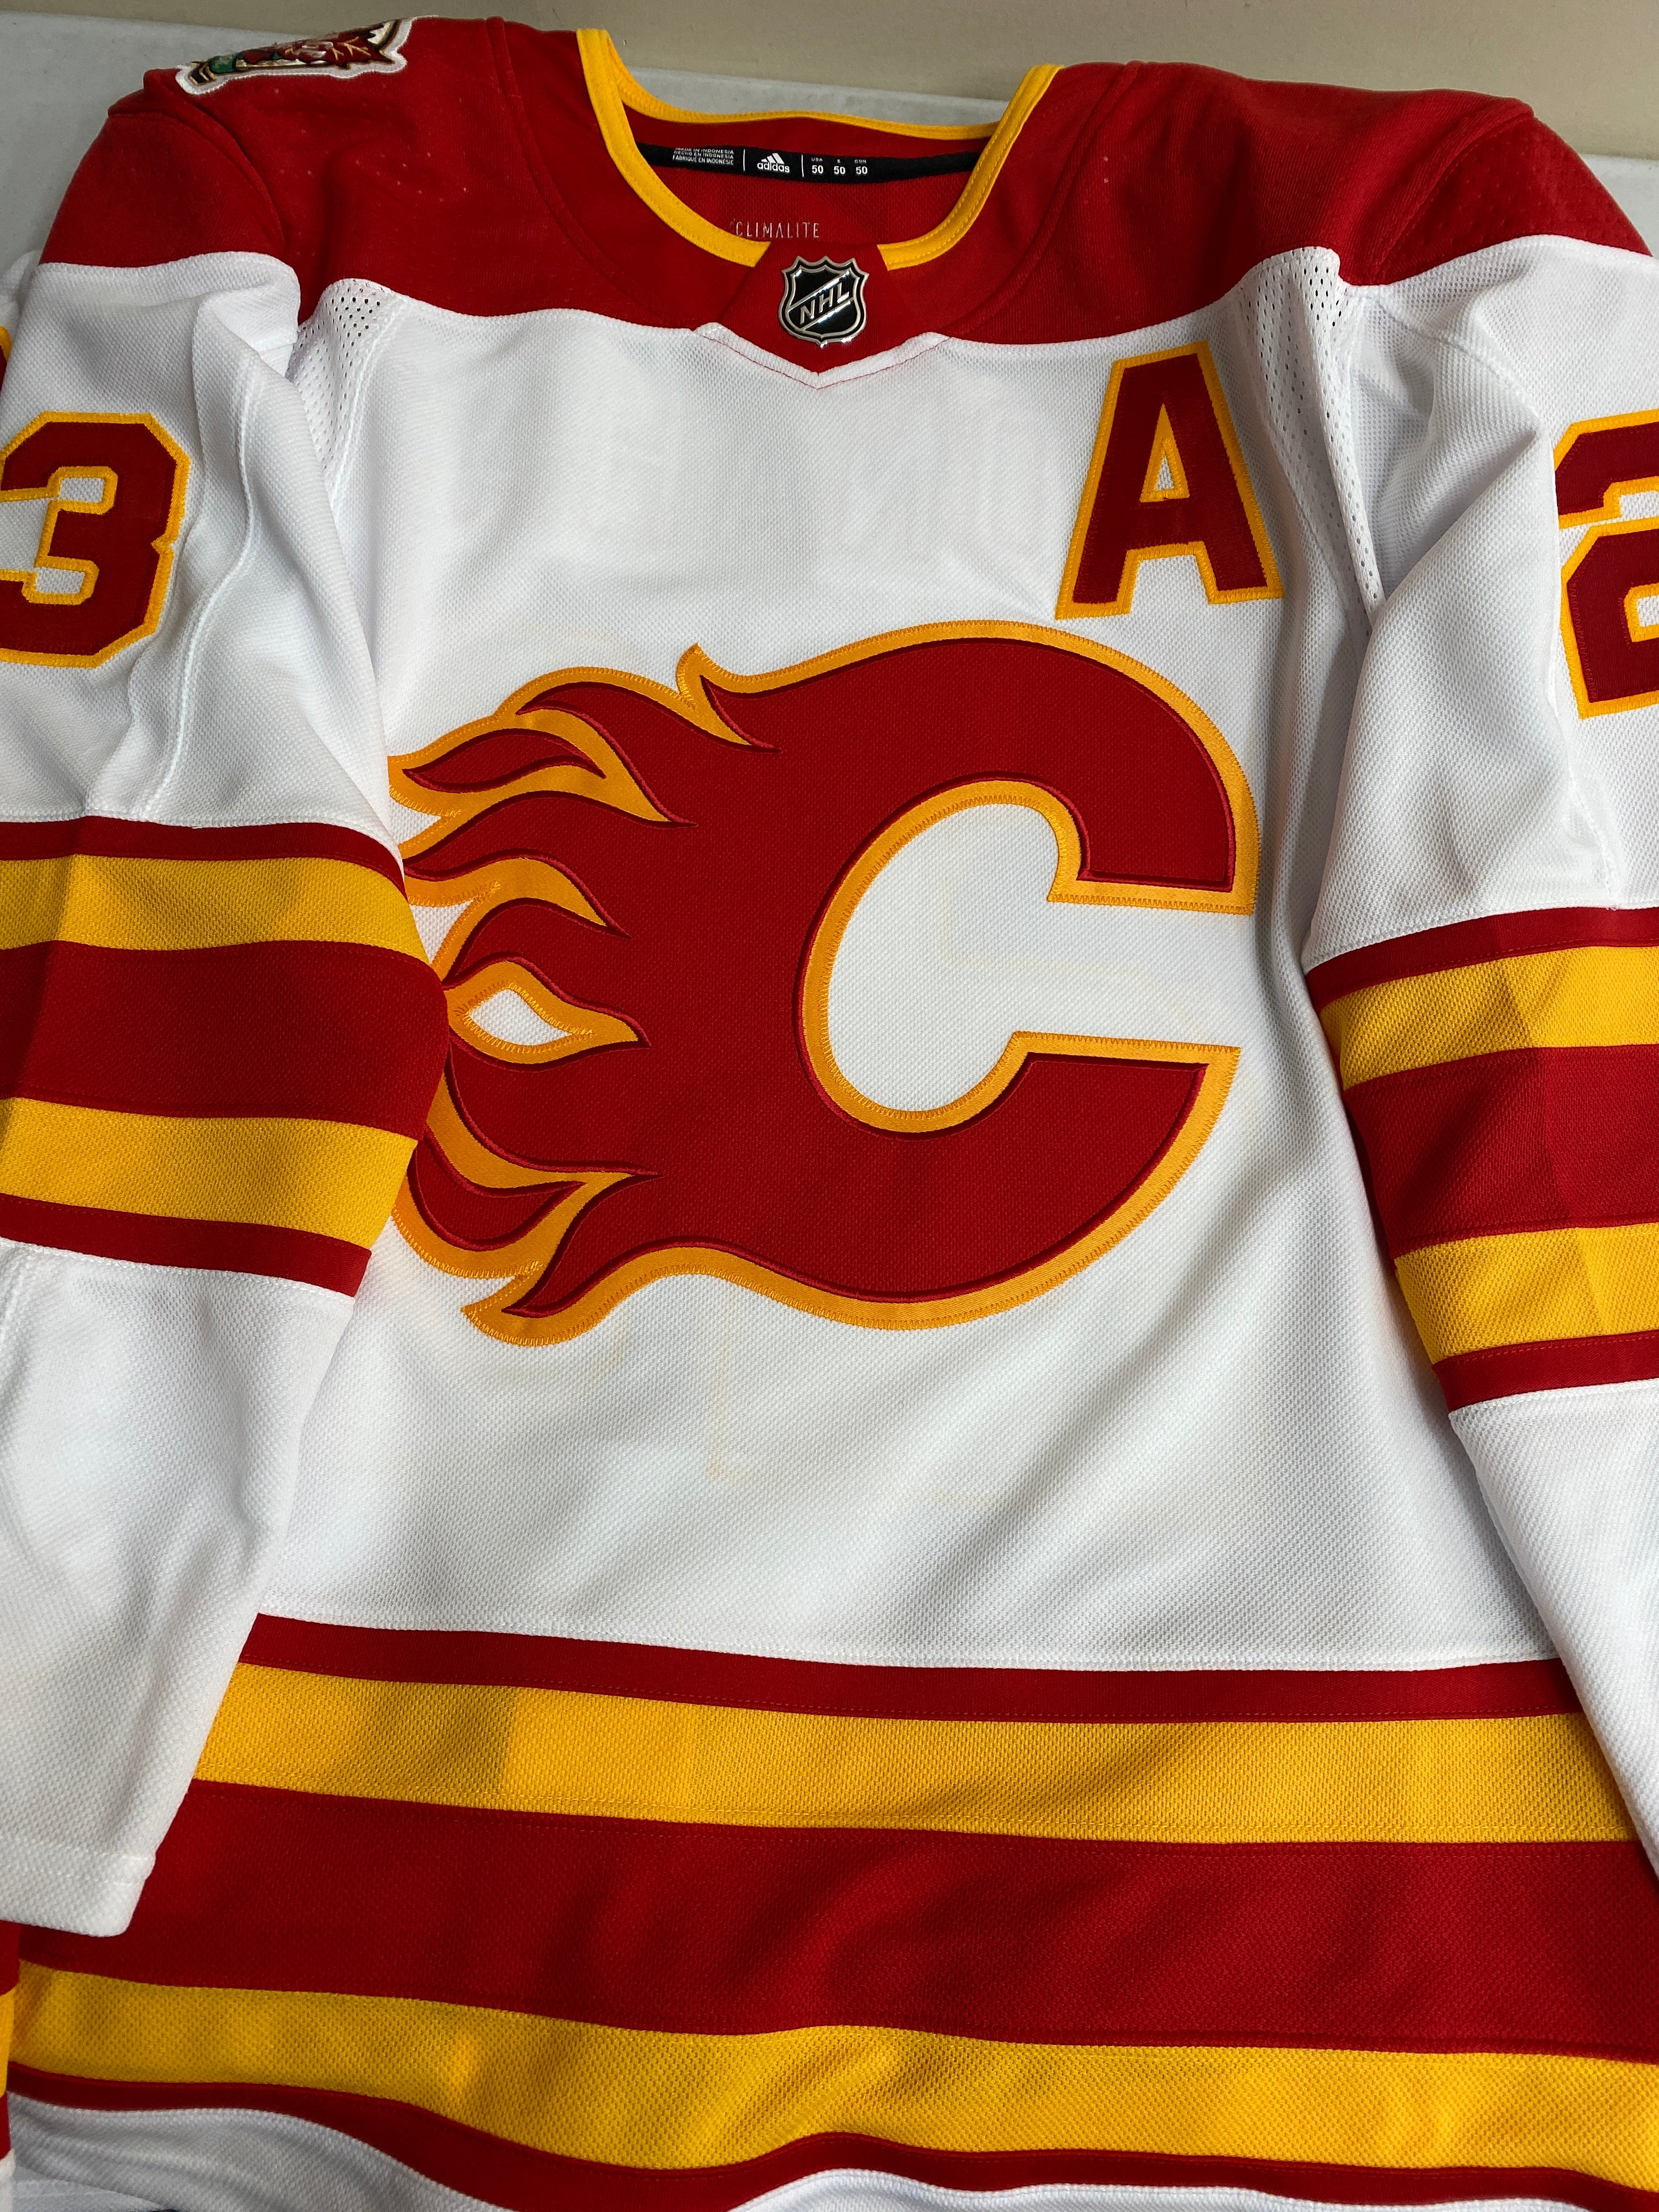 flames heritage classic jersey 2019